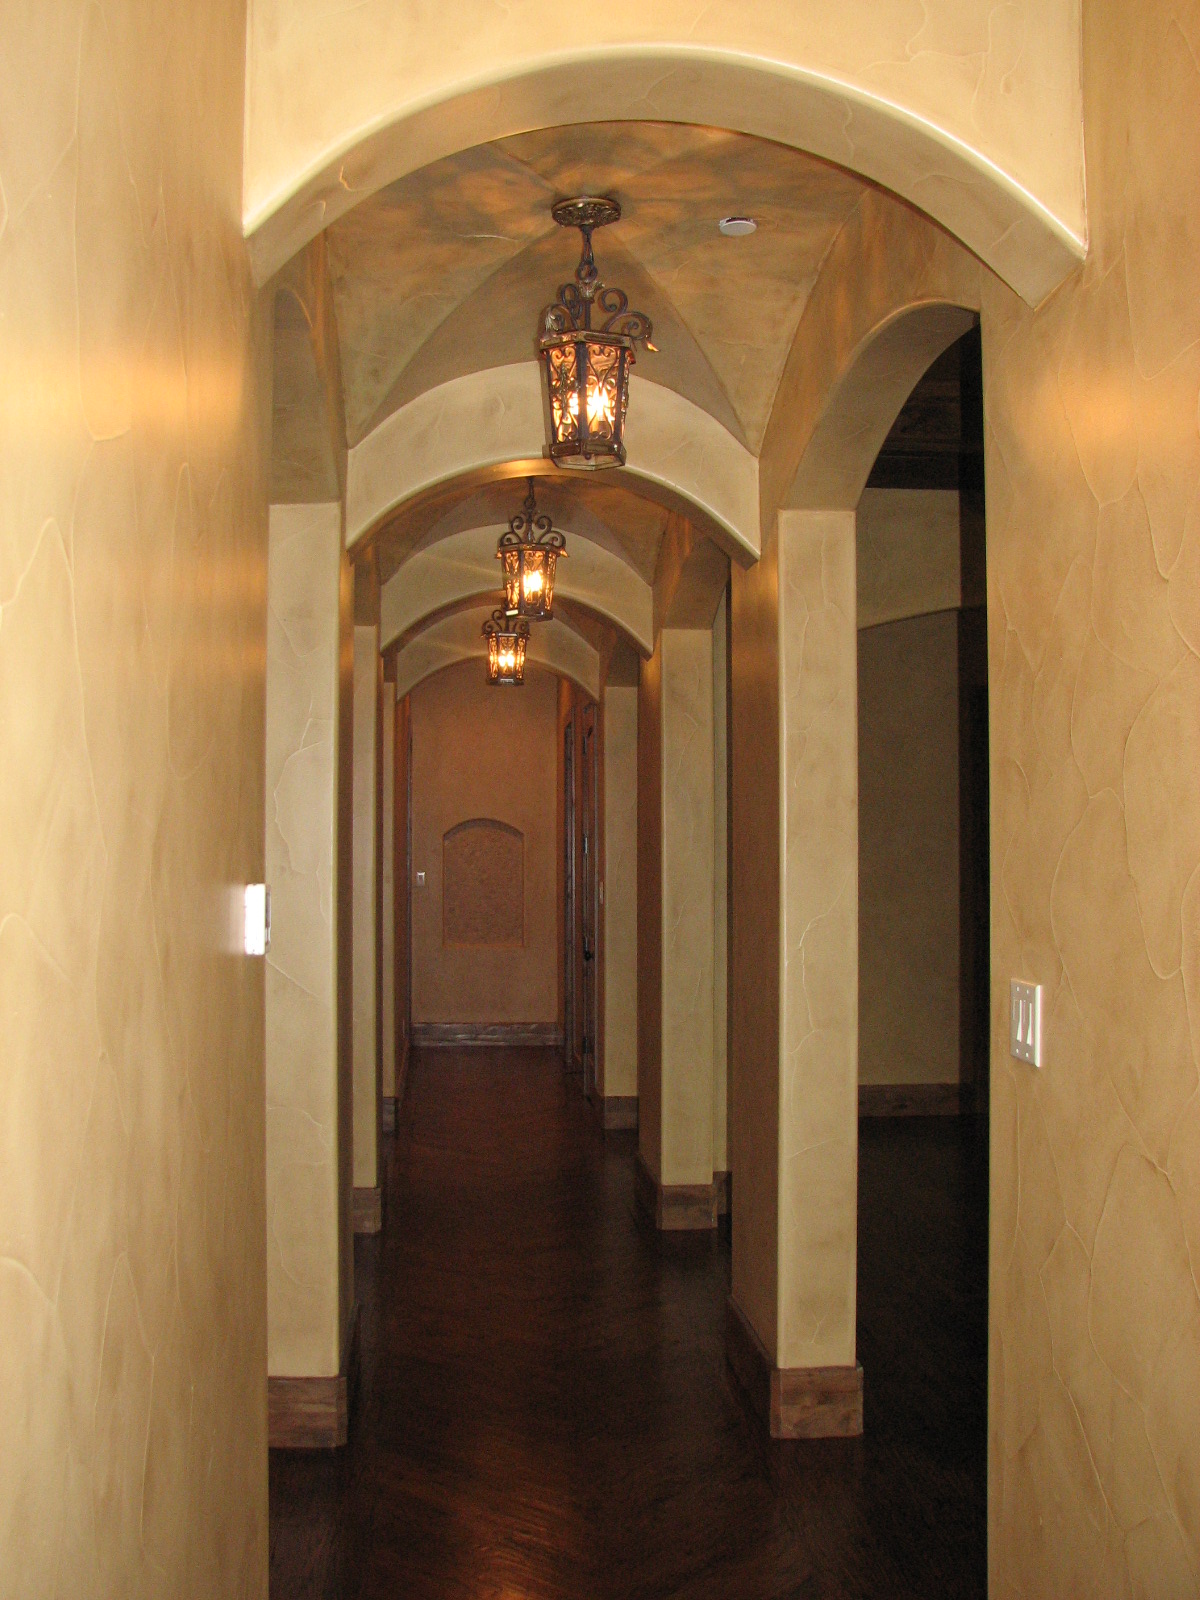 Norwich Homes 2000 Monticeto Trail Arches in Hallway